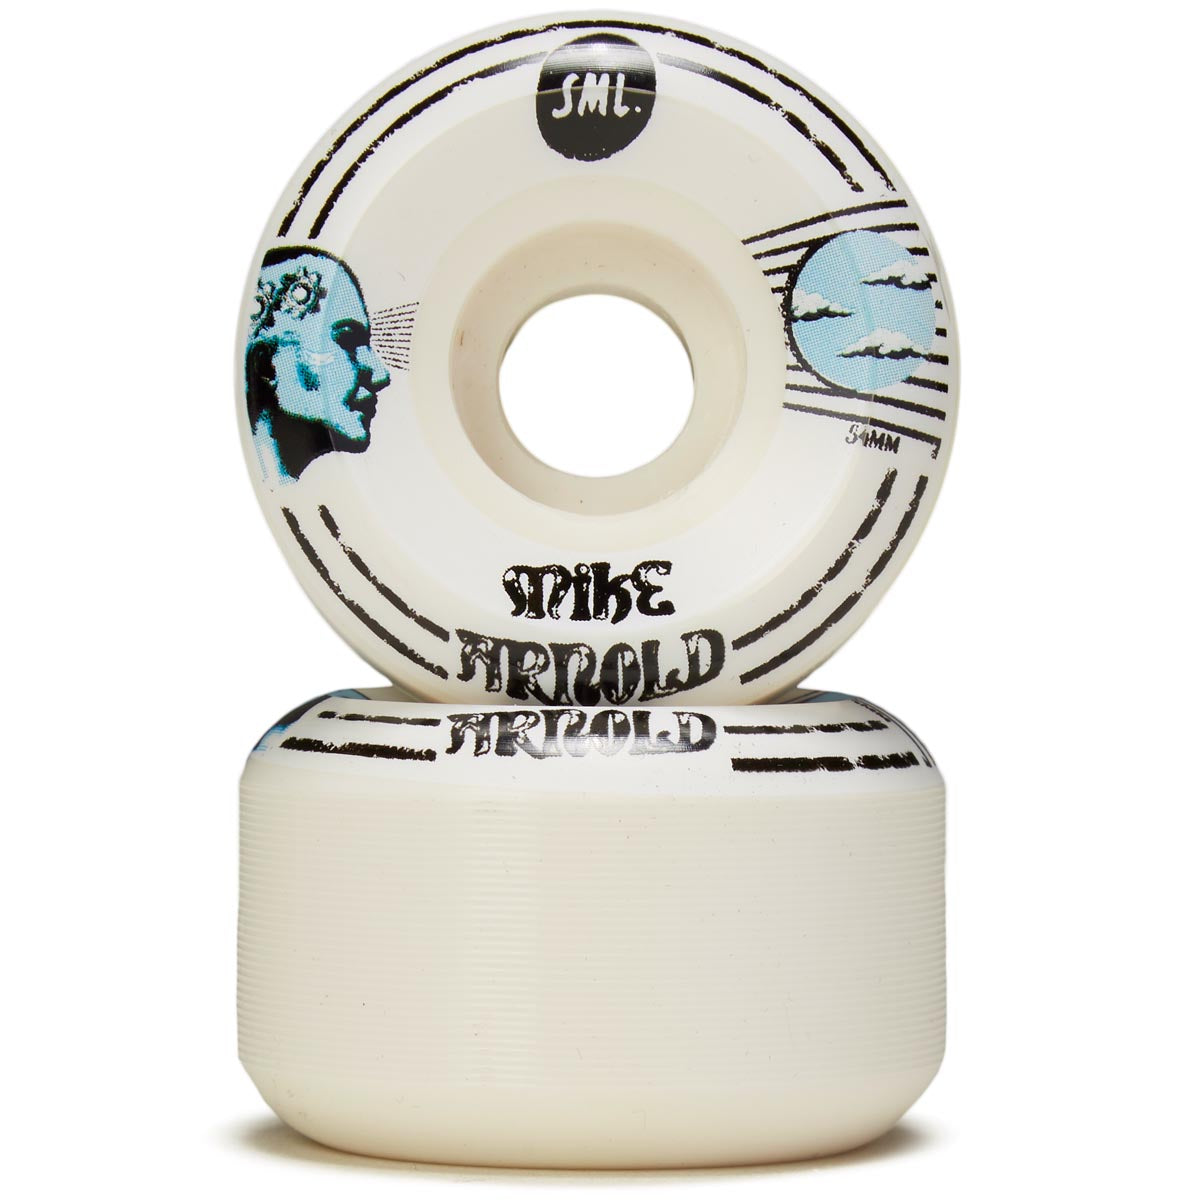 SML Lucidity Mike Arnold Skateboard Wheels - 54mm image 2